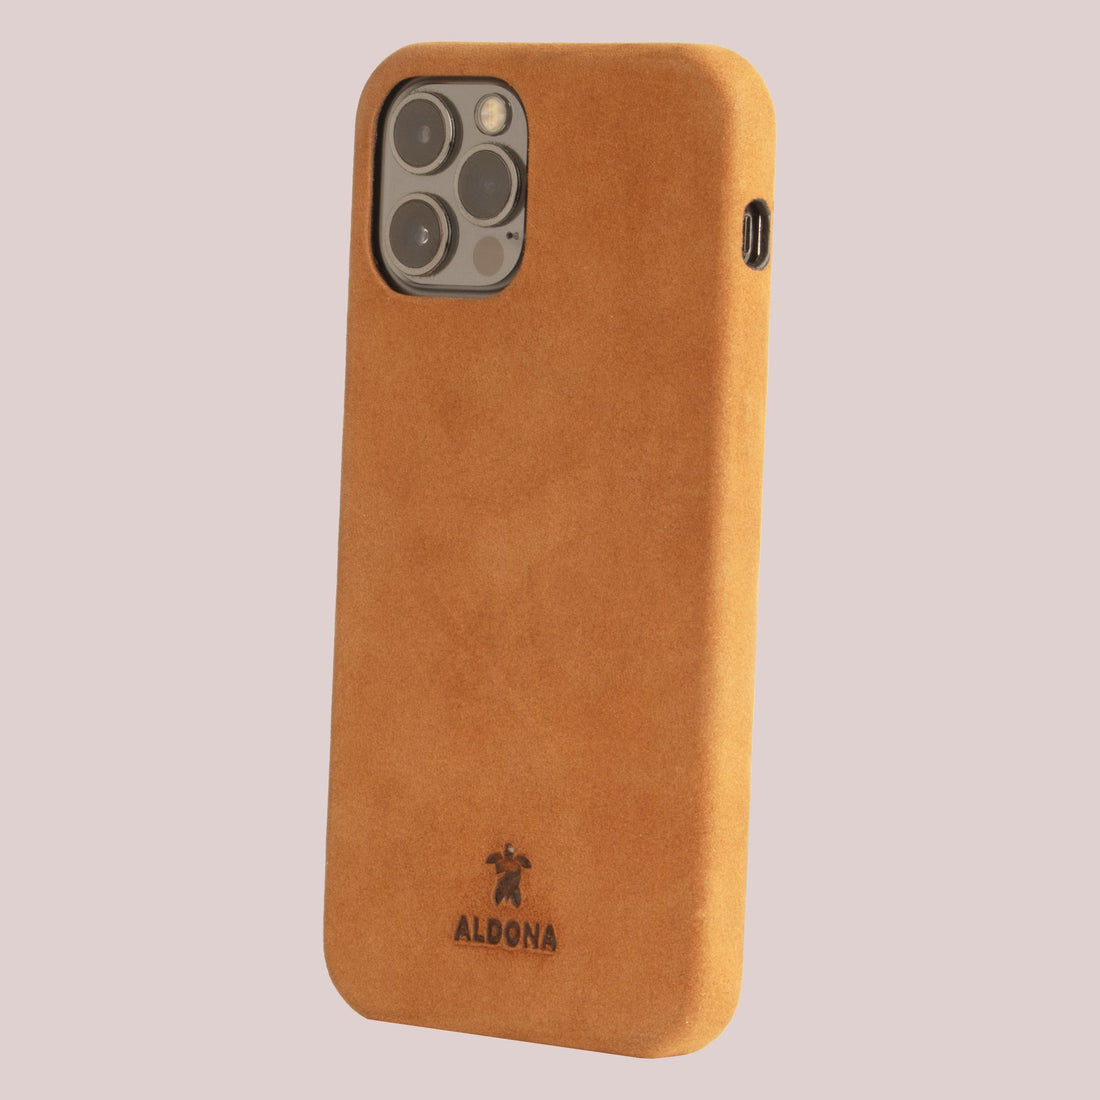 Kalon Case for iPhone 14 series with MagSafe Compatibility - Burnt Tobacco